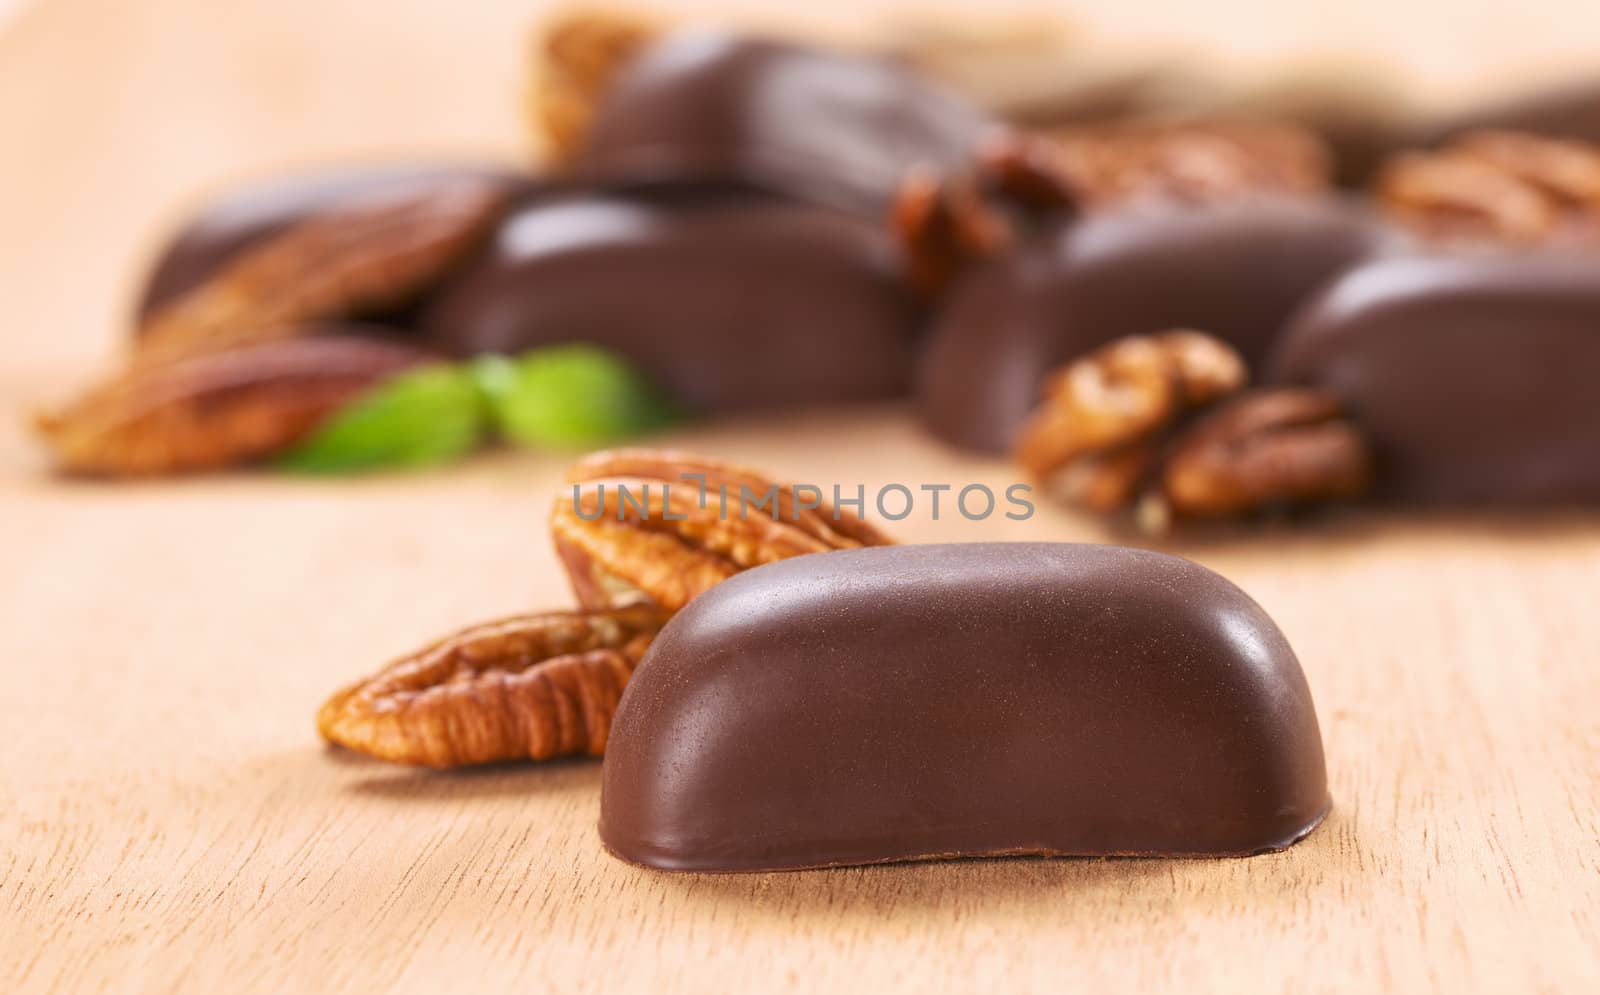 Chocolate Candy with Pecan Nut by ildi